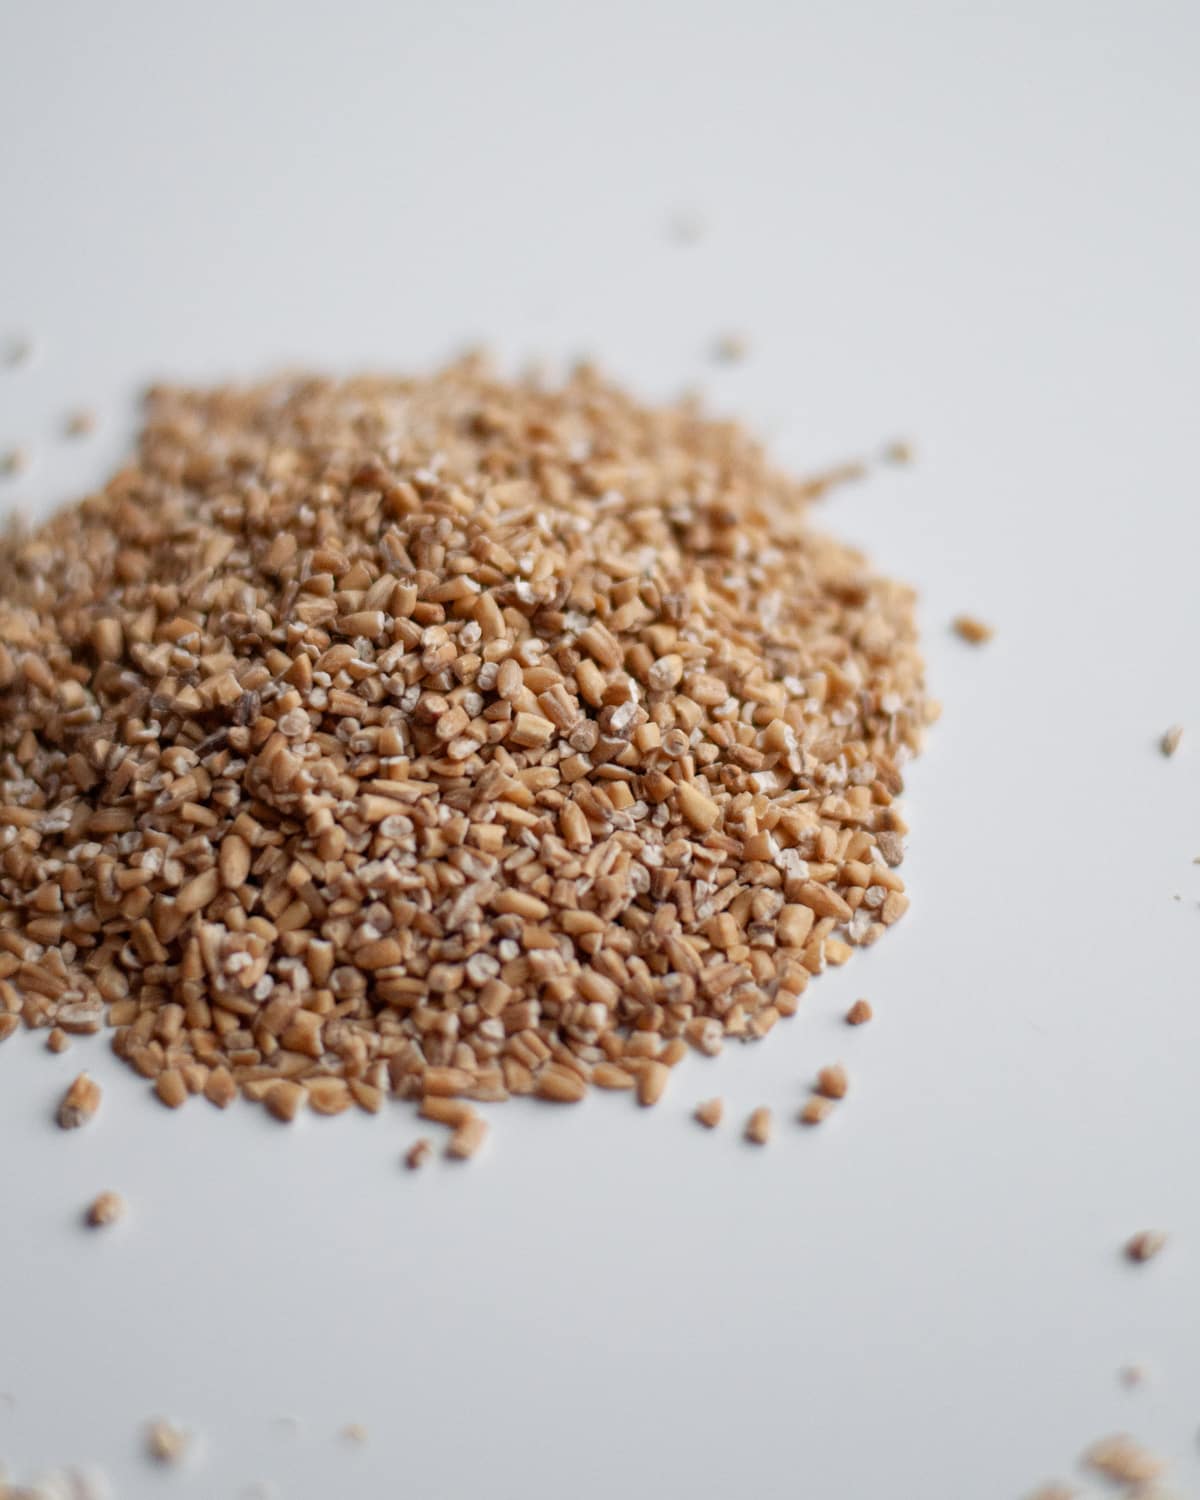 Close up of a pile of steel cut oats to show the shape and texture of the grain.